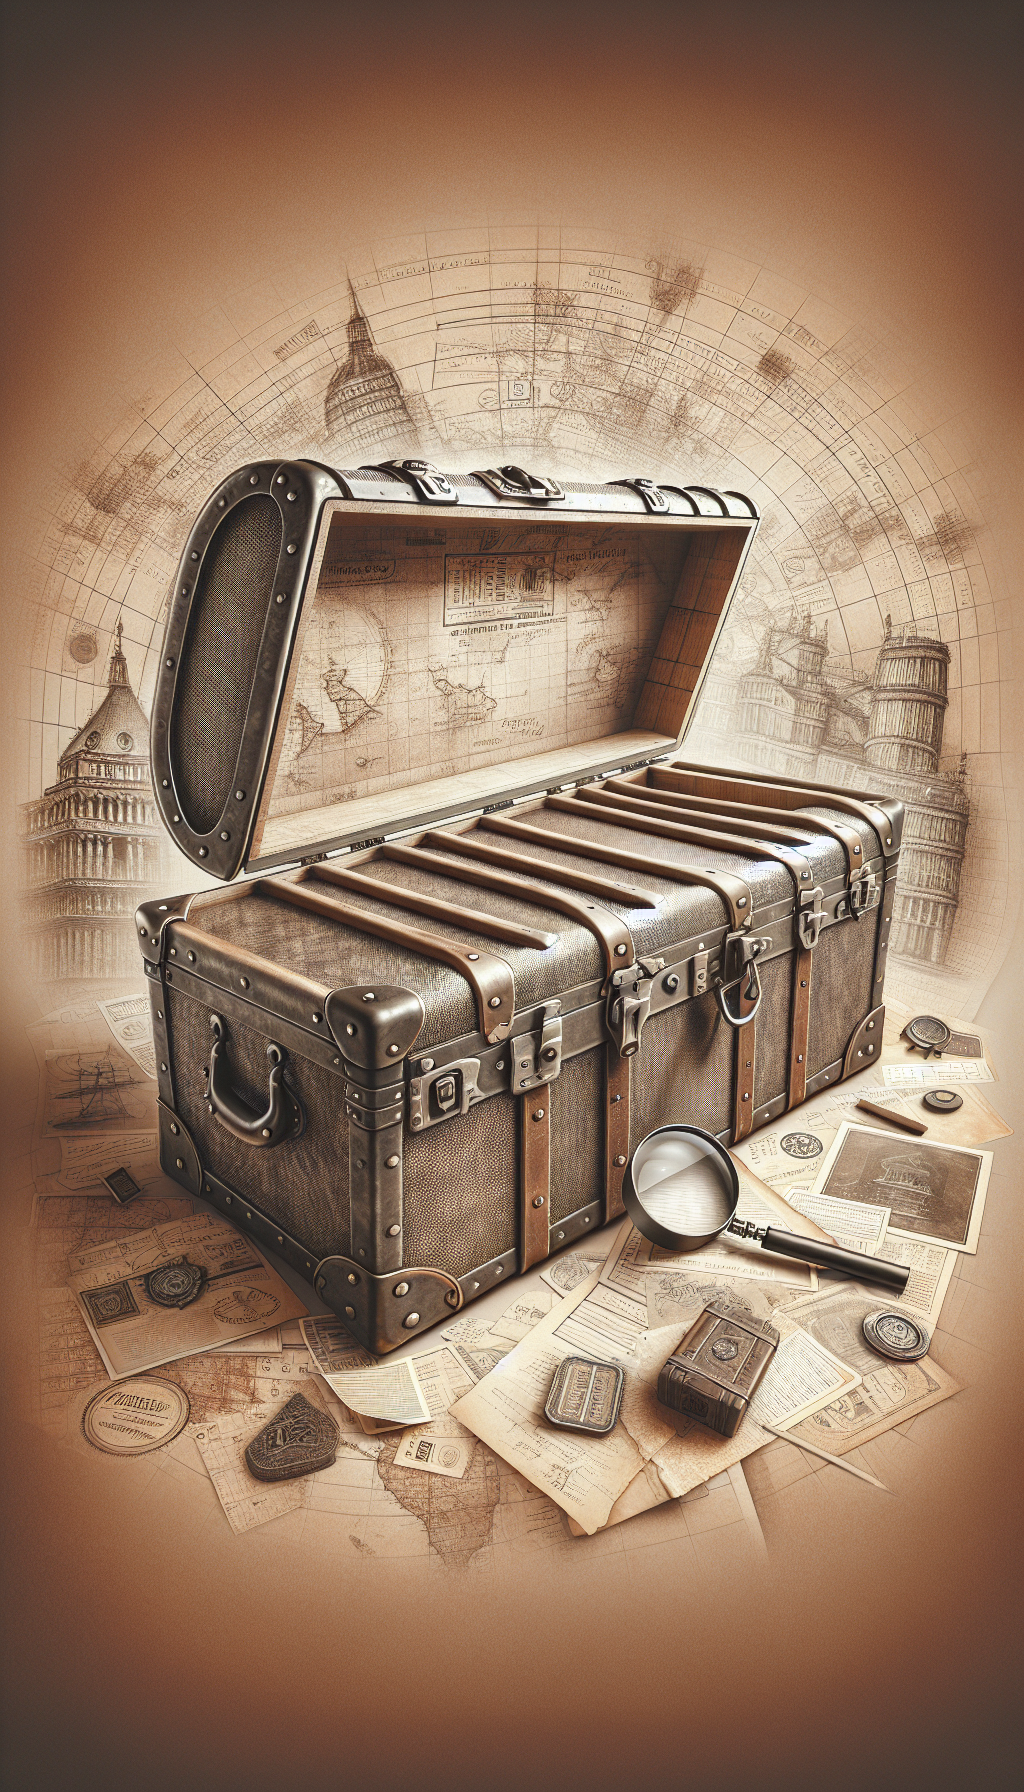 An intricately detailed steamer trunk, corners reinforced with metal, sits open amidst a swirl of sepia-toned historical landmarks and ephemera. A magnifying glass hovers over the trunk, revealing distinguishing features like unique locks, manufacturer stamps, and travel stickers, providing clues to its past voyages. The style oscillates between photorealistic depictions of the trunk and sketched, old-map-like backgrounds.